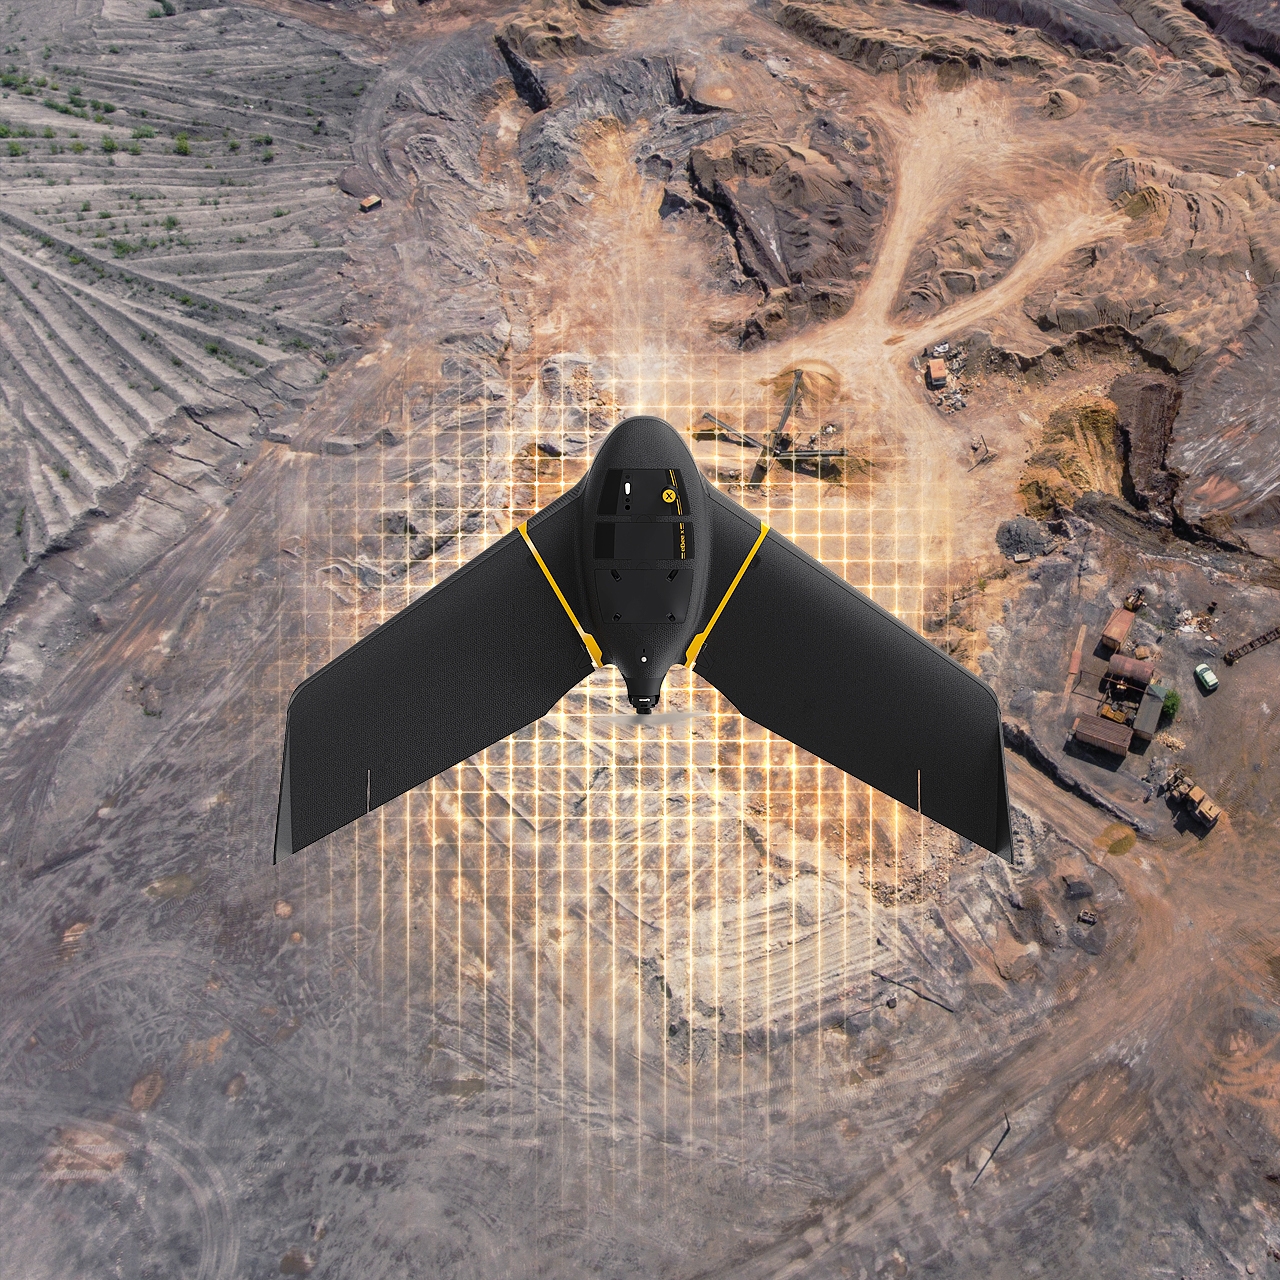 eBee TAC tactical mapping drone - Drones